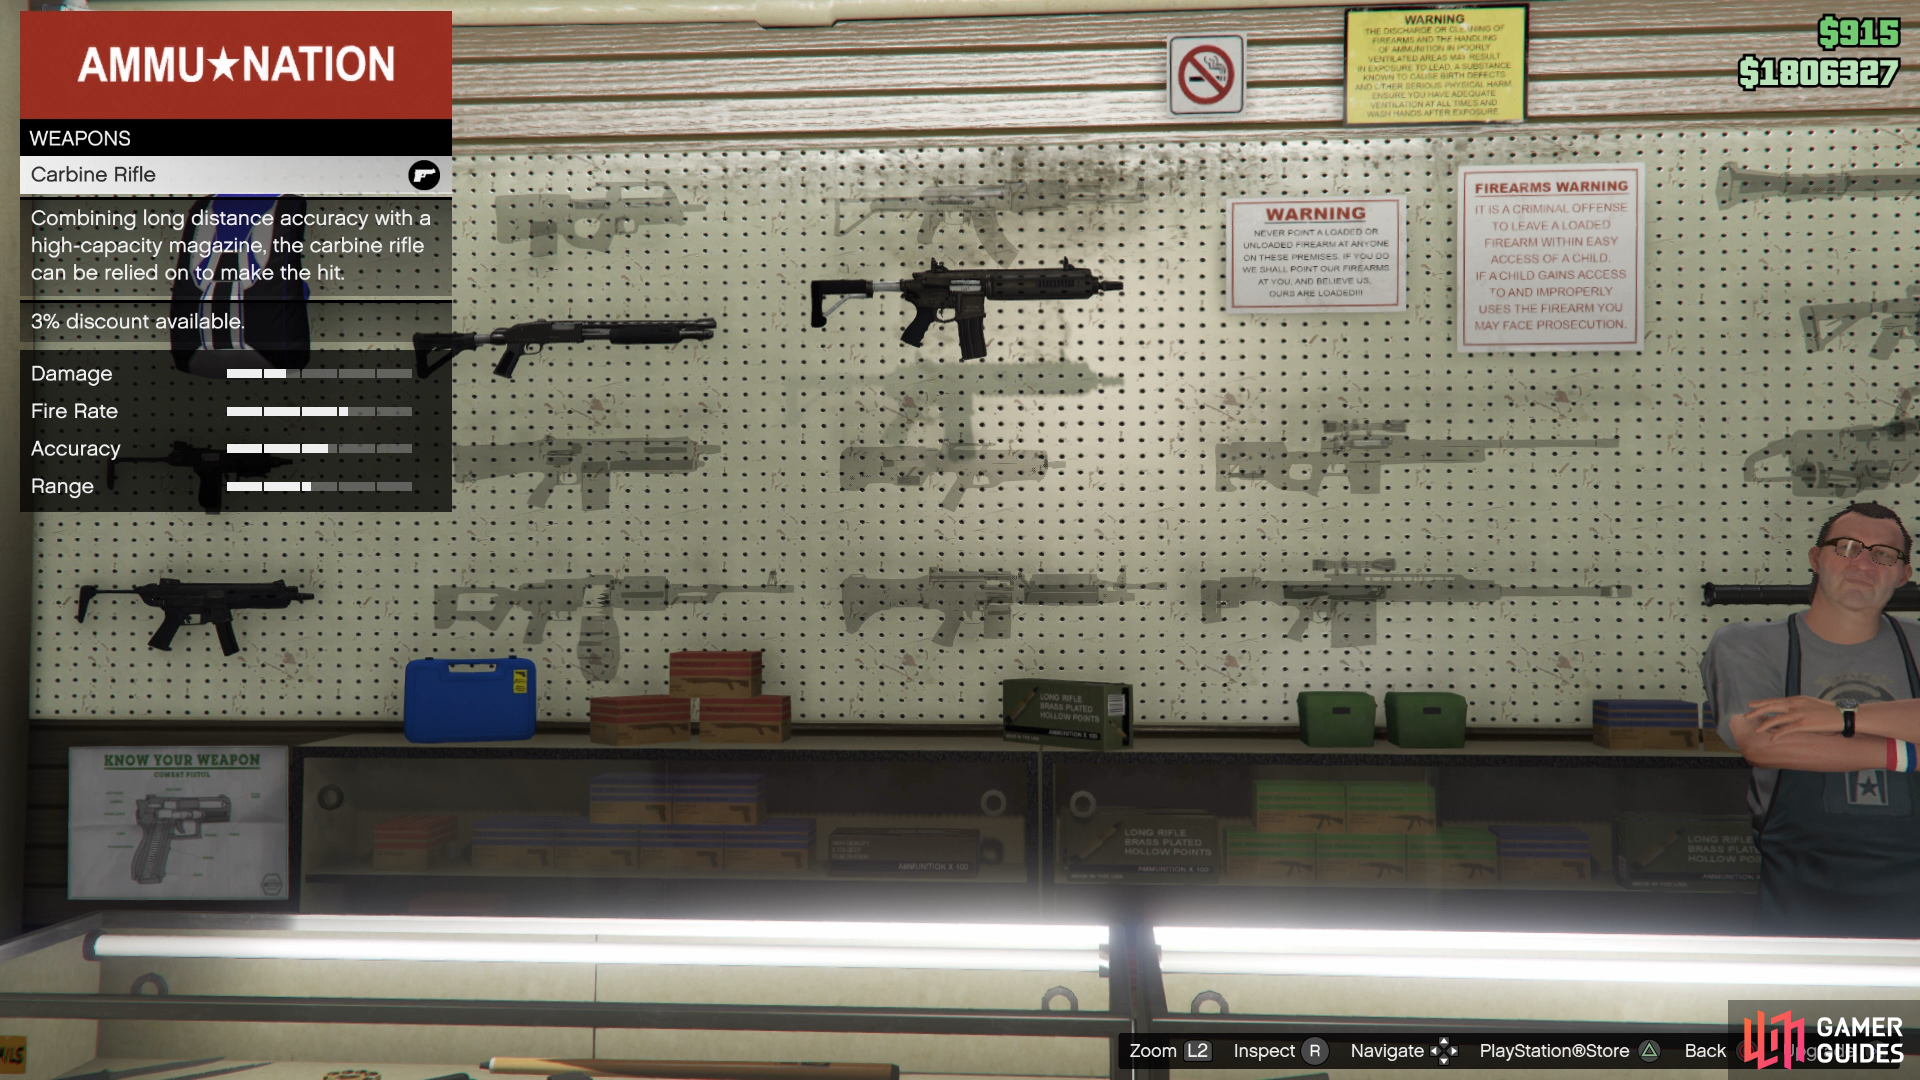 then purchase some weapons from the Ammu-Nation Store 